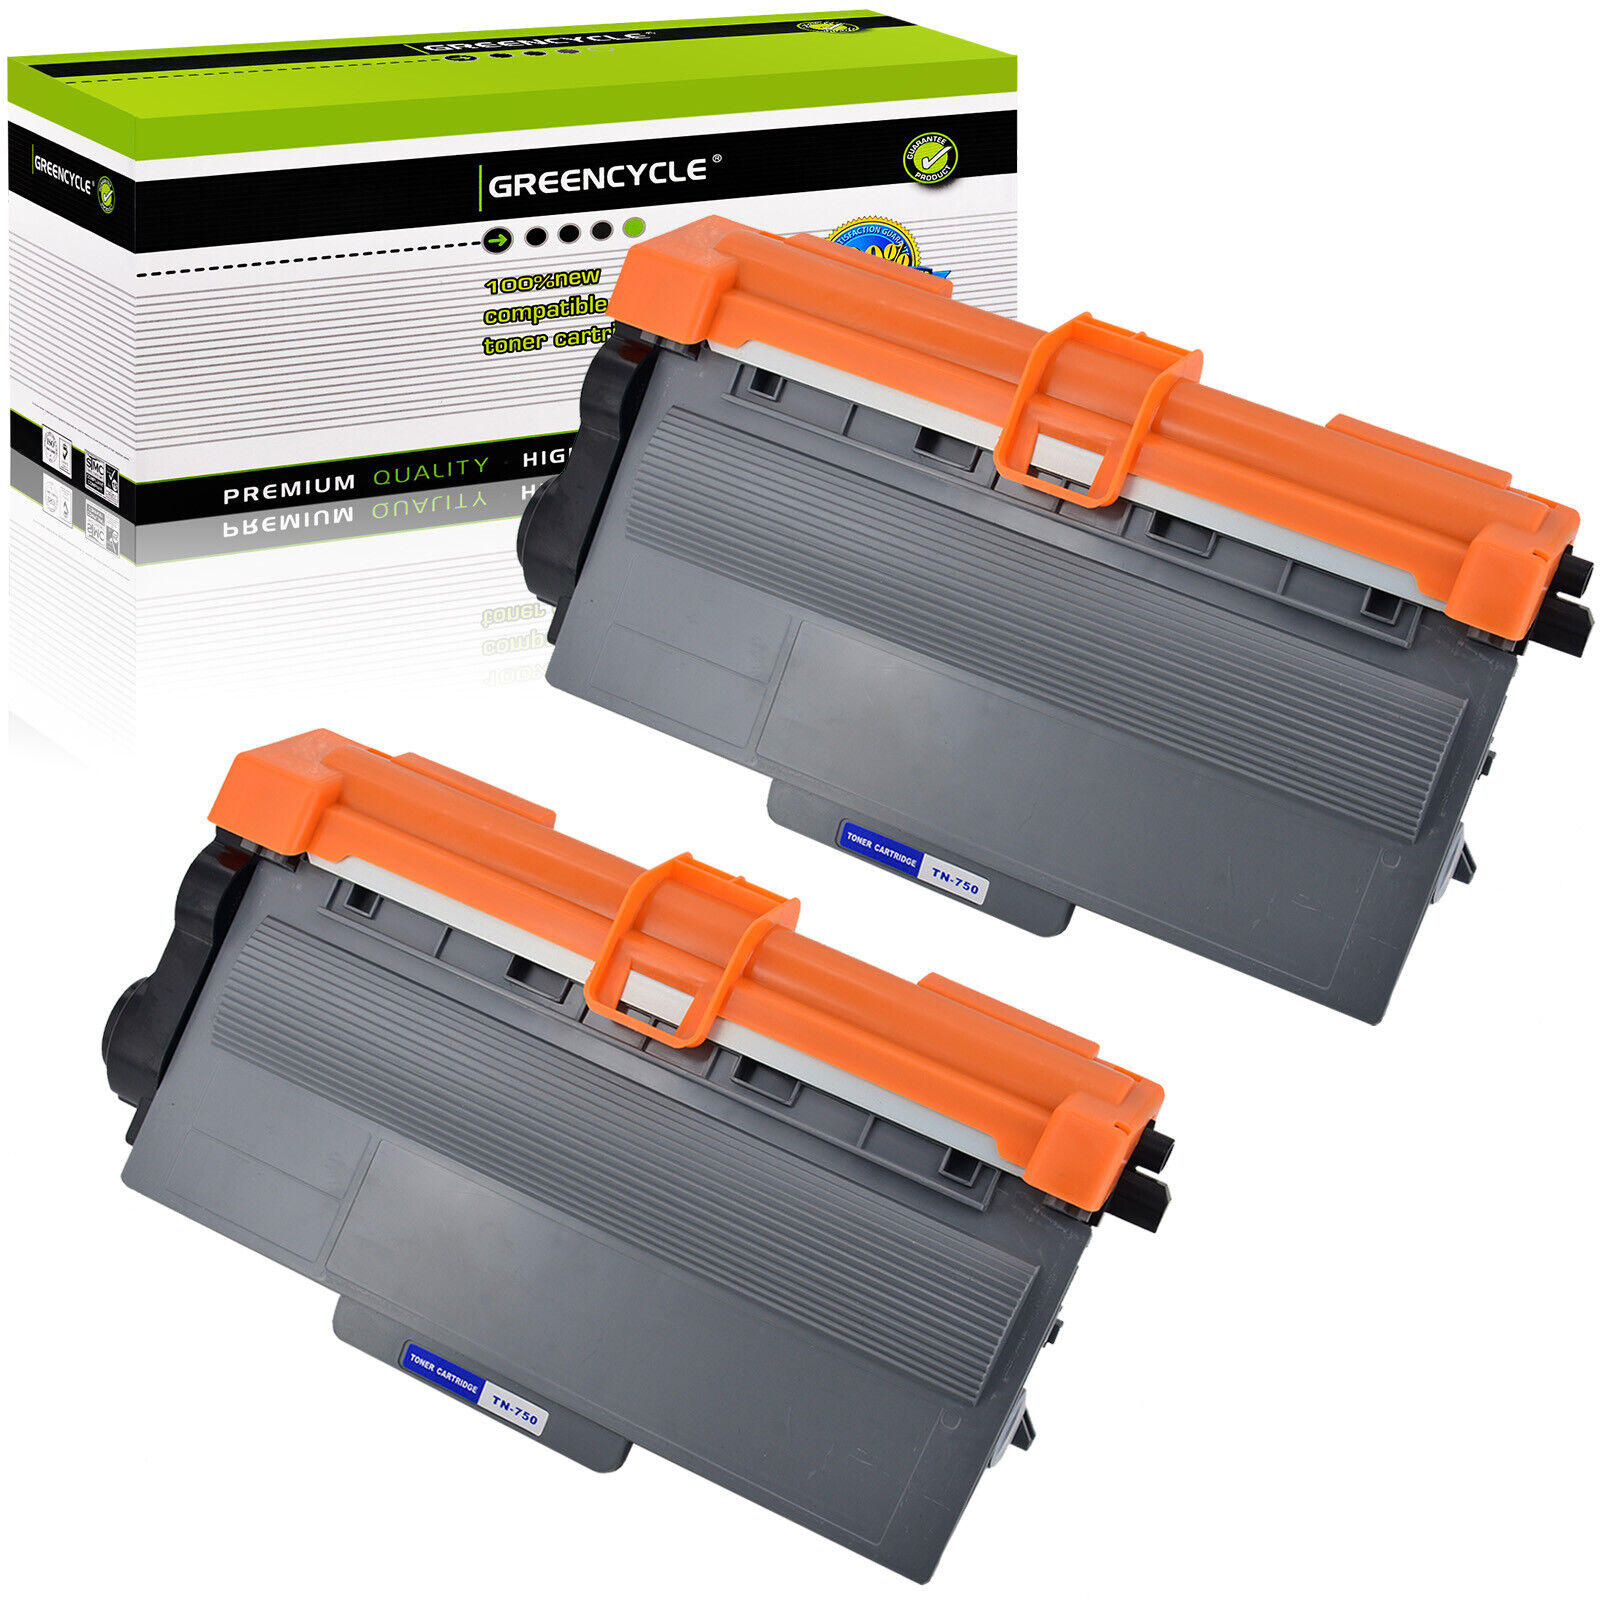 GREENCYCLE 2PK TN750 TN720 Toner Cartridge Fits for Brother DCP-8150DN HL-5450DN